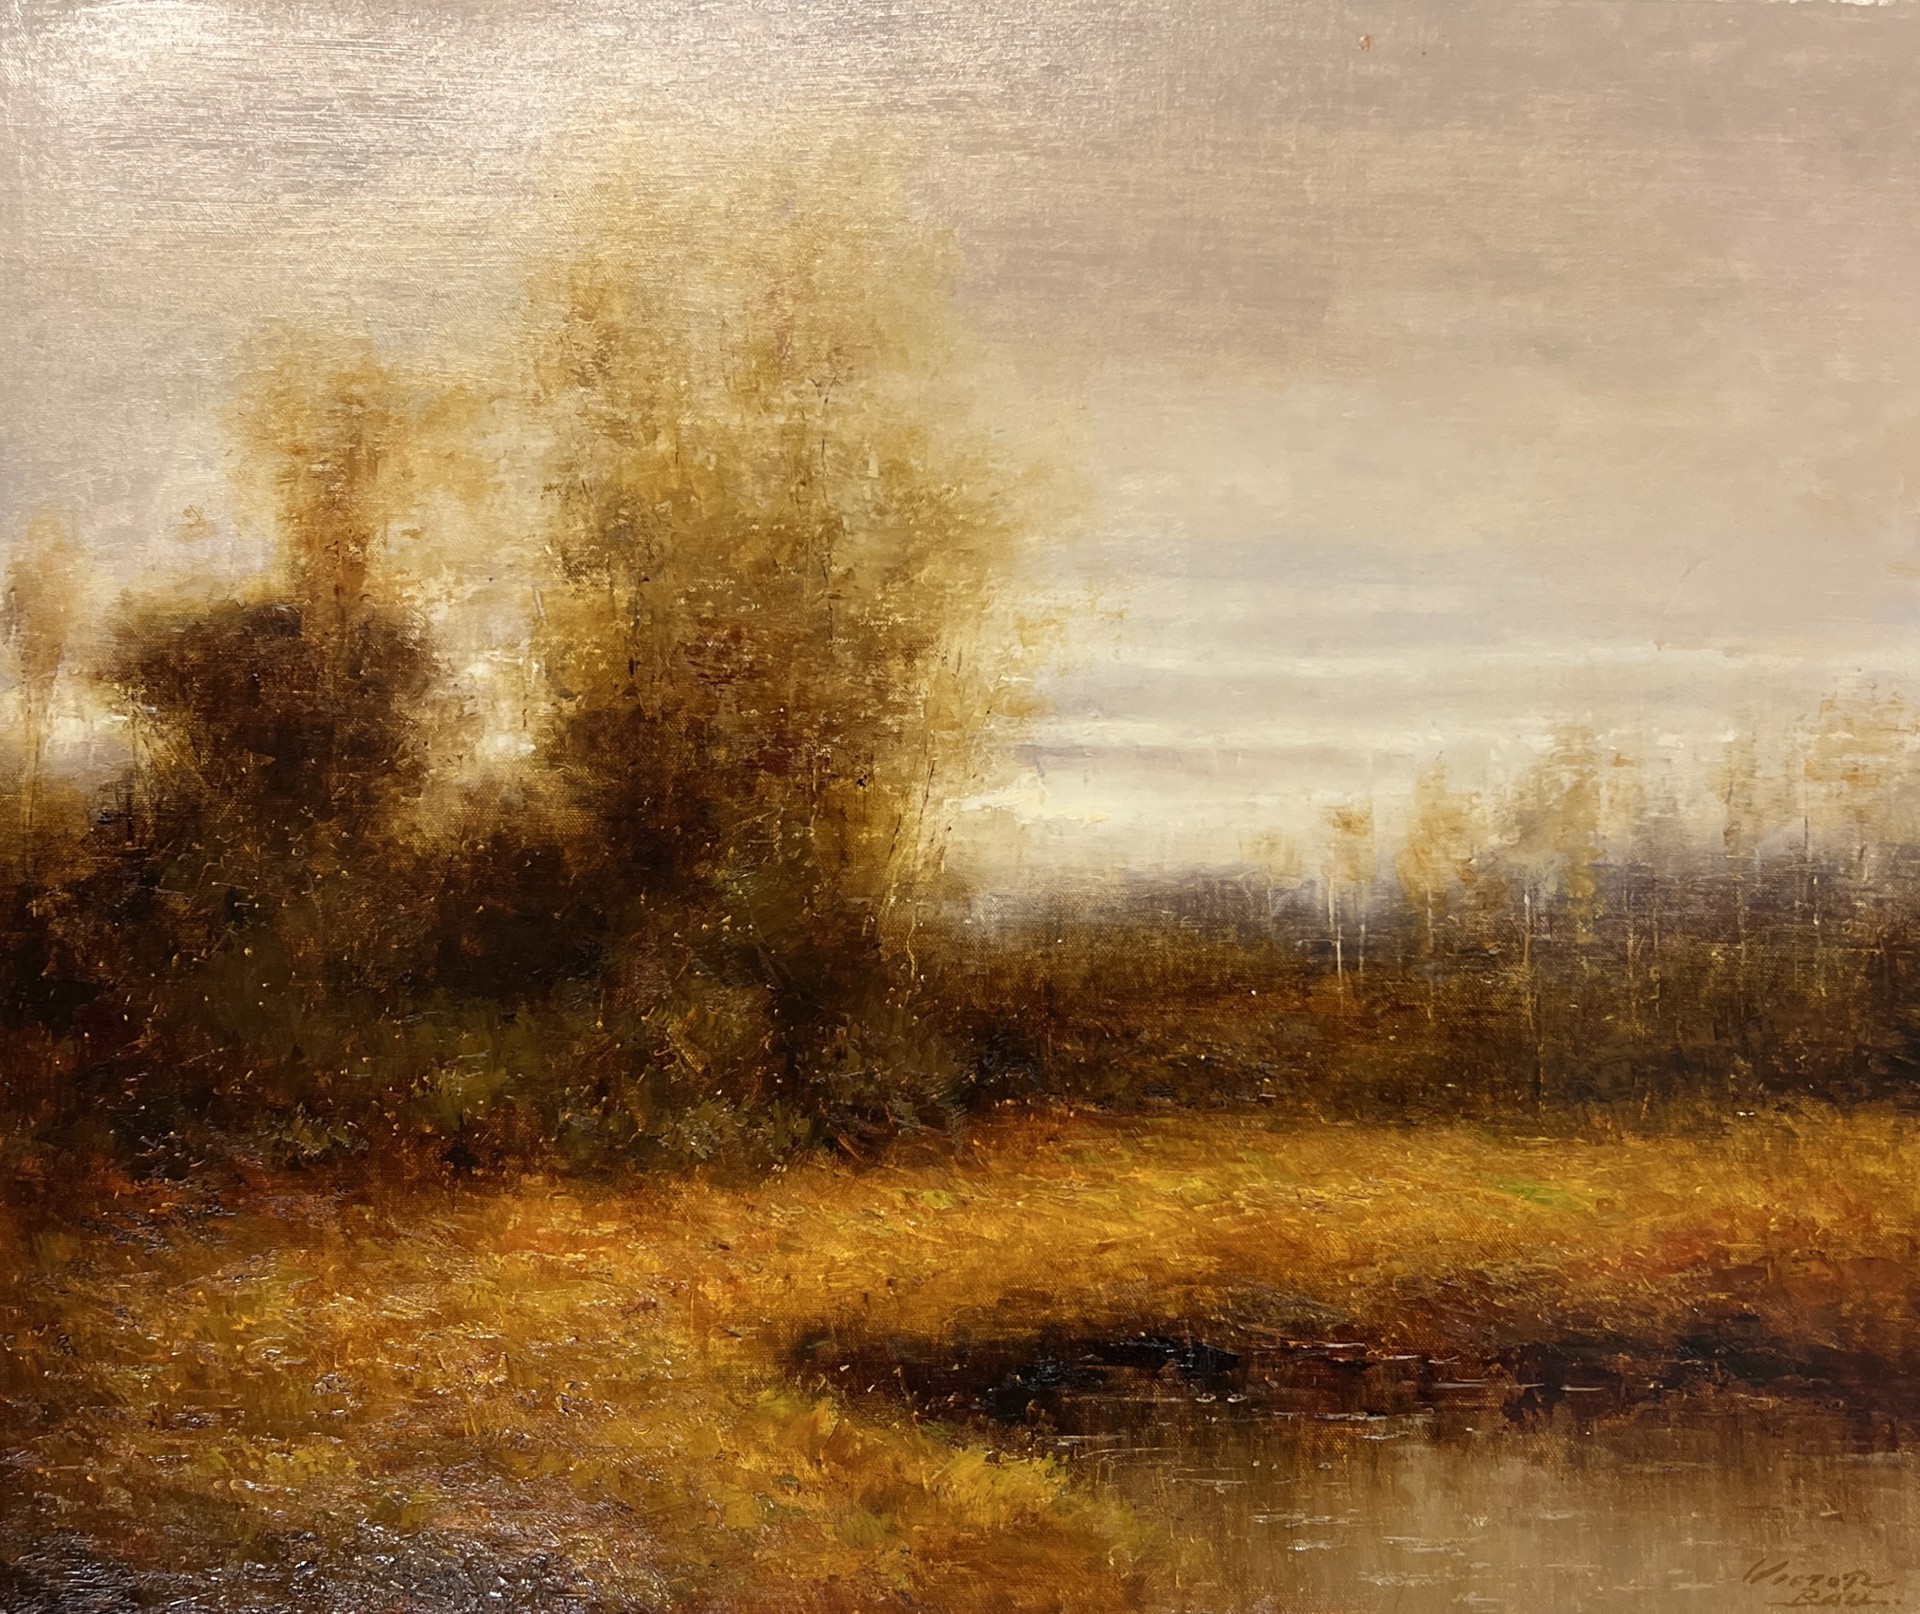 LANDSCAPE IN GOLD TONES by VICTOR BALL